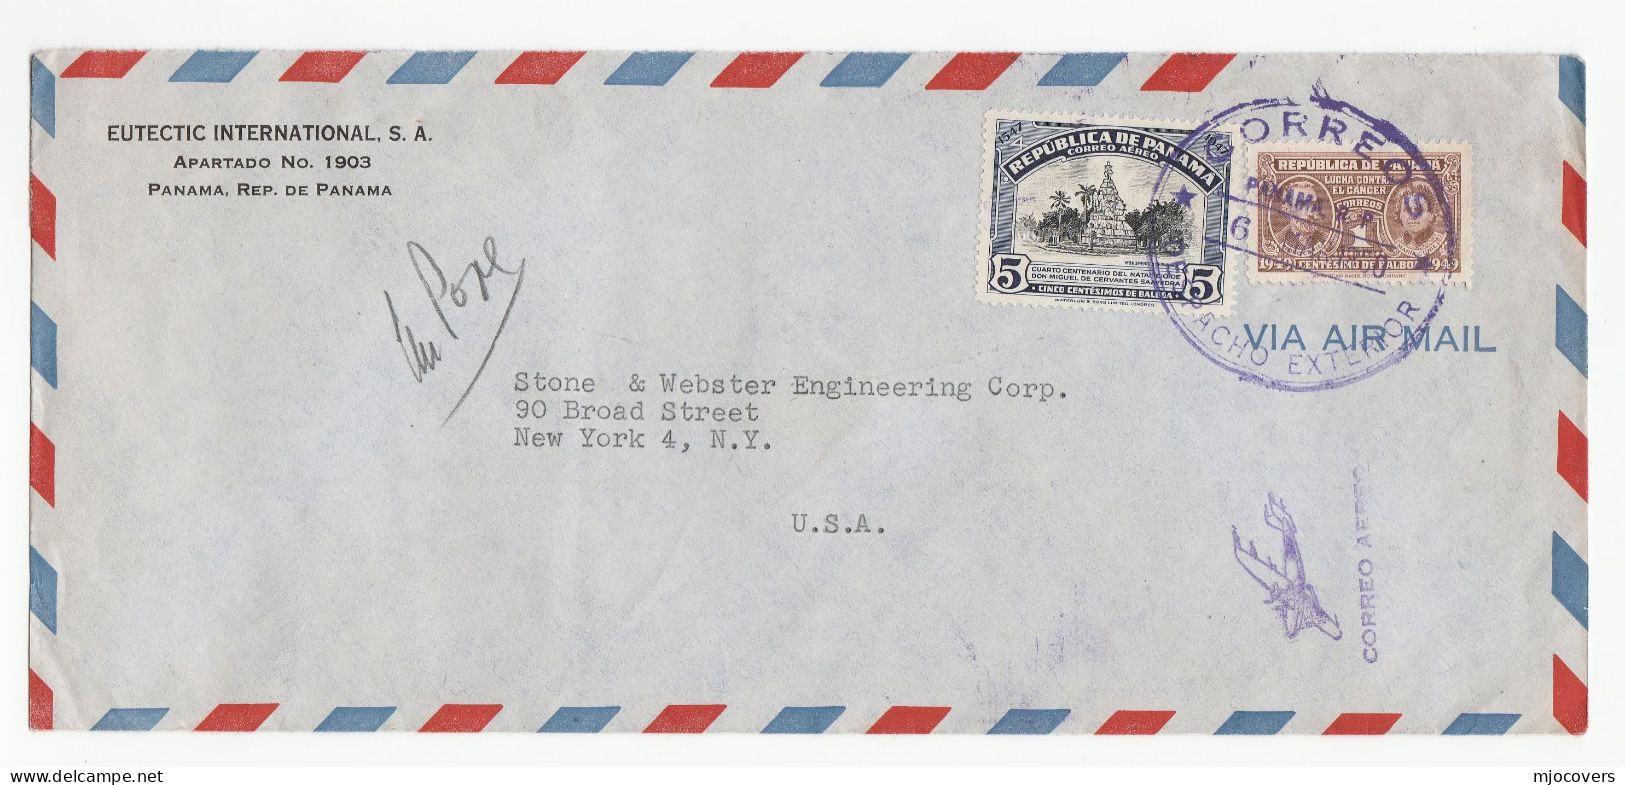 CANCER  - 1950 Panama COVER  Marie CURIE Anti Cancer Stamps Air Mail To USA Chemistry Health Medicine - Ziekte